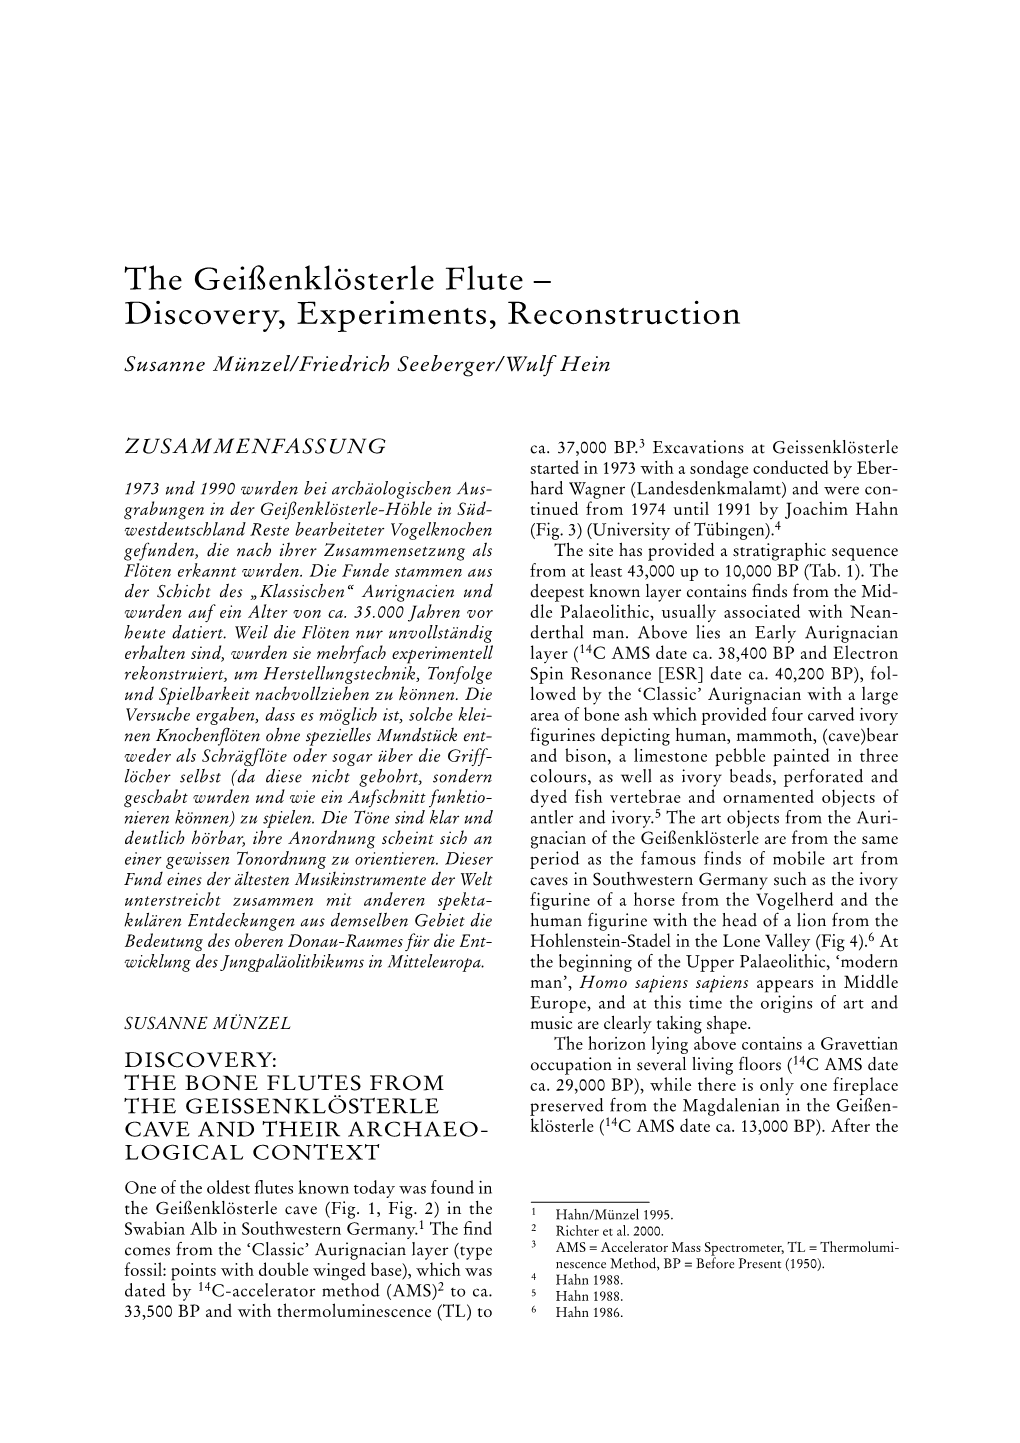 The Geißenklösterle Flute – Discovery, Experiments, Reconstruction